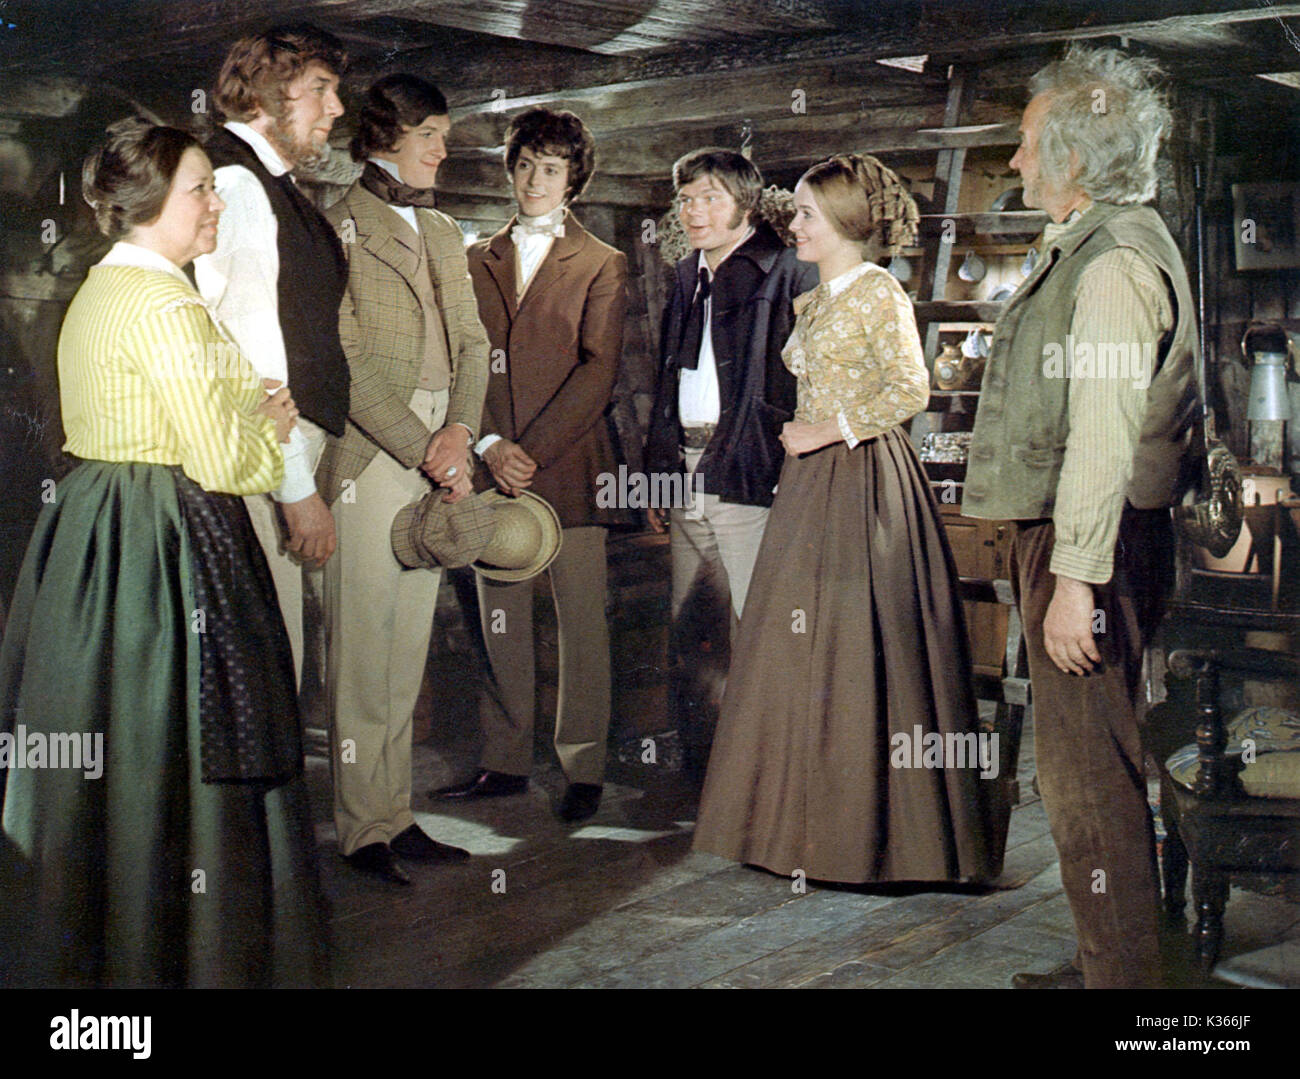 DAVID COPPERFIELD L-R, MEGS JENKINS, MICHAEL REDGRAVE, CORIN REDGRAVE, ROBIN PHILLIPS, ANDREW McCULLOCH, SINEAD CUSACK, CYRIL CUSACK Stock Photo